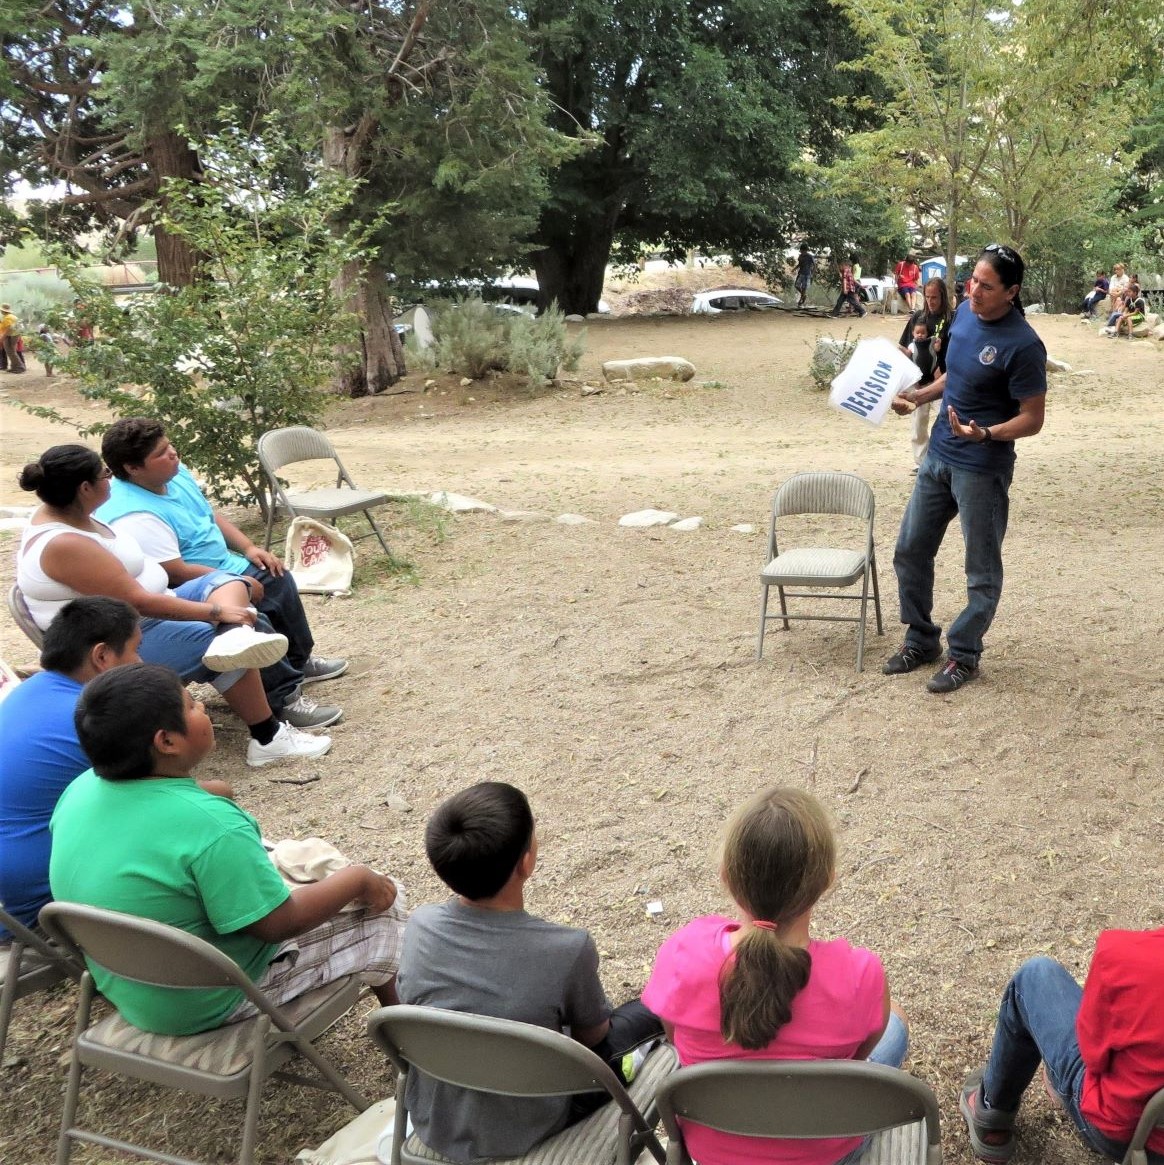 A wildland fire educator gives a presentation on fire prevention.